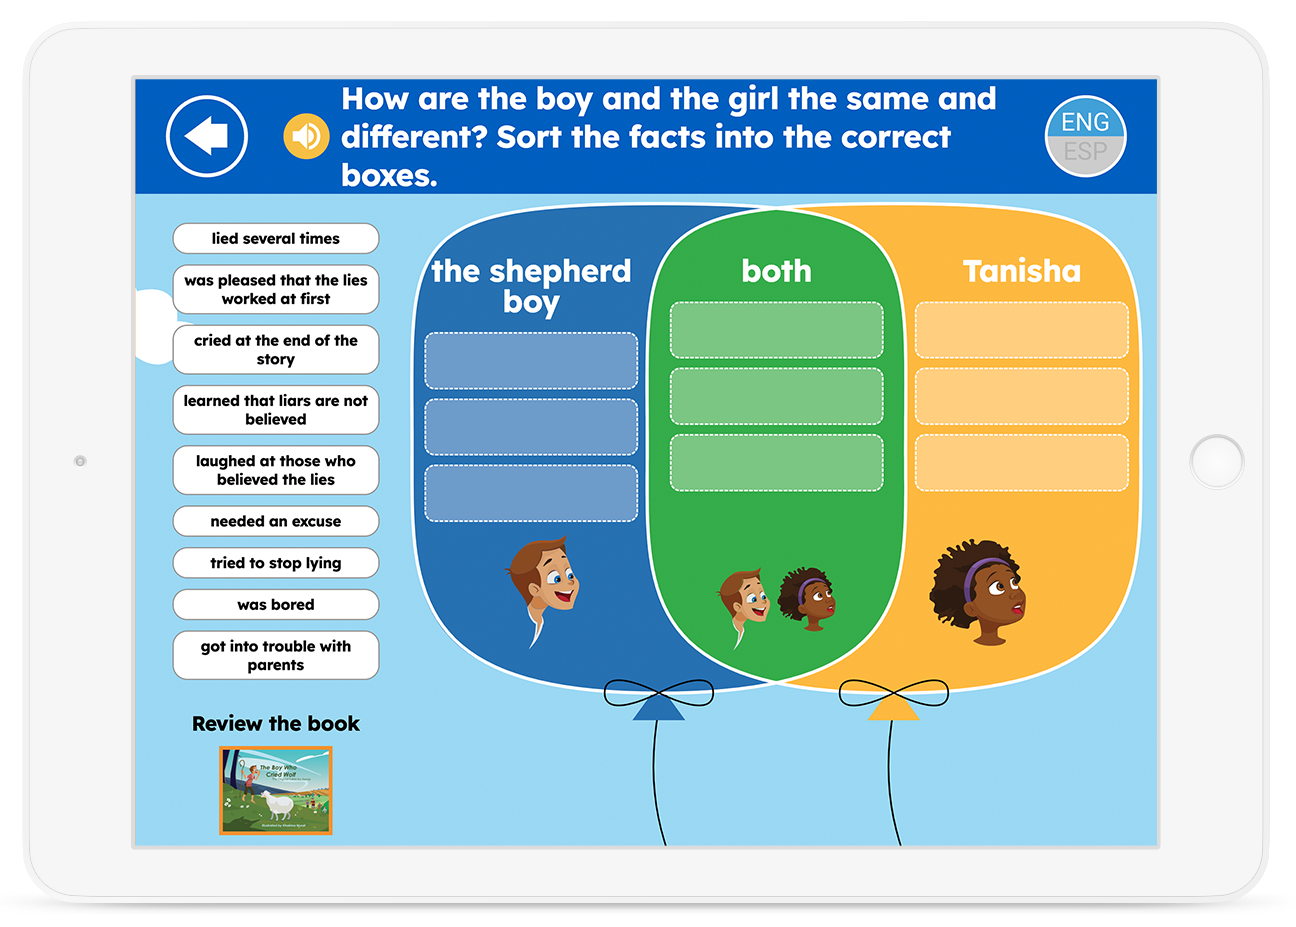 Practice comprehension skills such as comparing and contrasting information from two books.